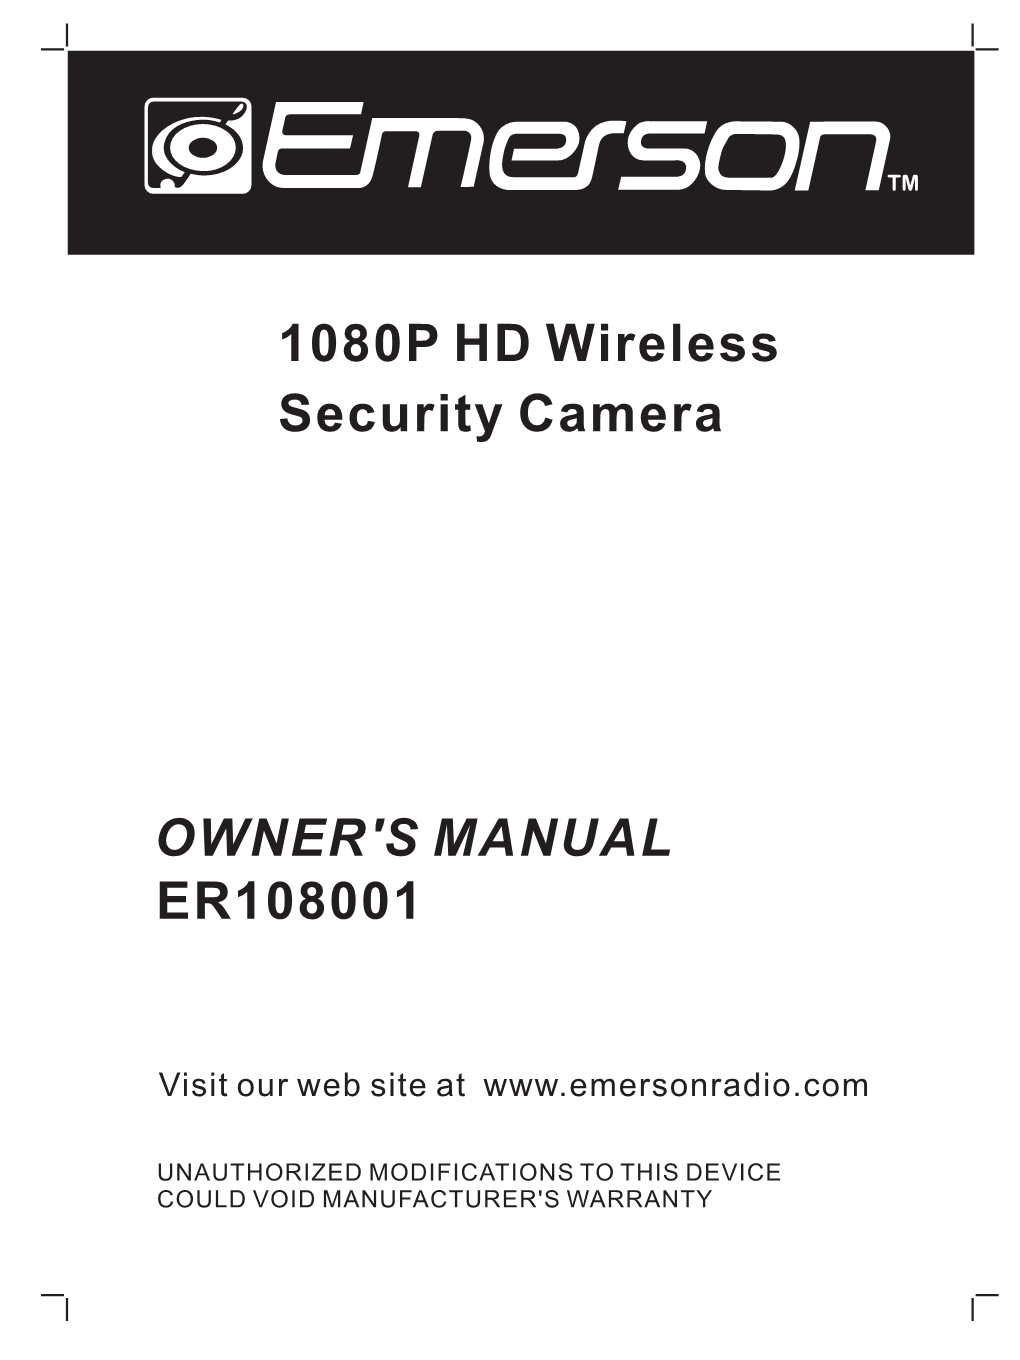 OWNER's MANUAL ER108001 1080P HD Wireless Security Camera